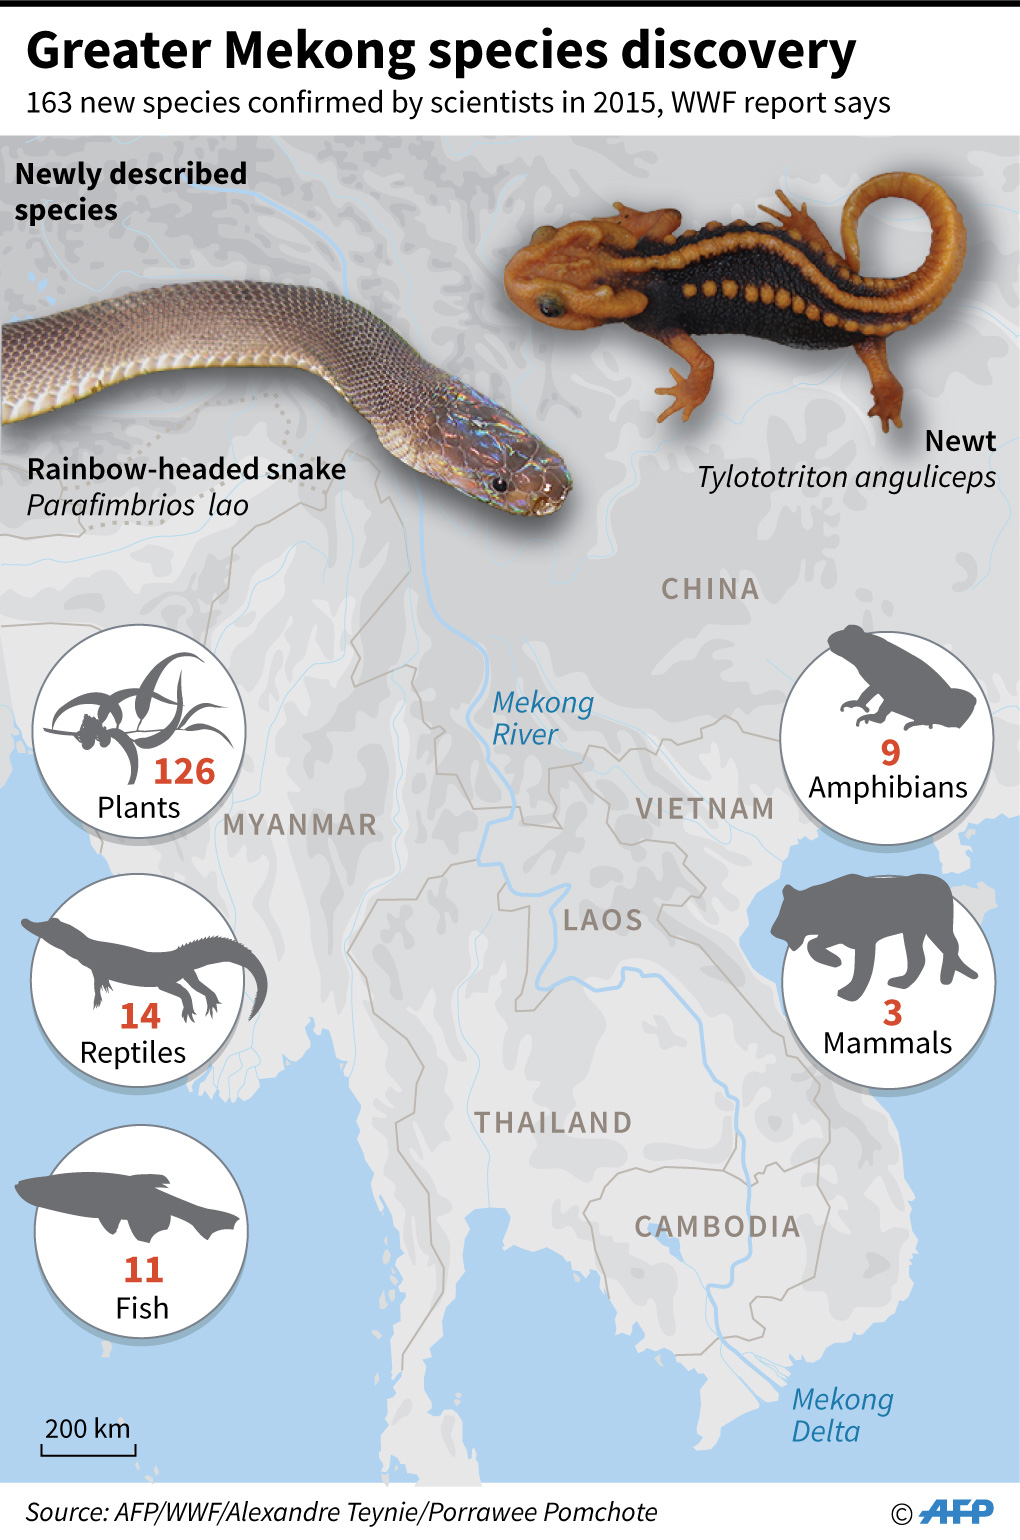 Graphic on new species discovered in the Mekong region, WWF said in a report Monday.